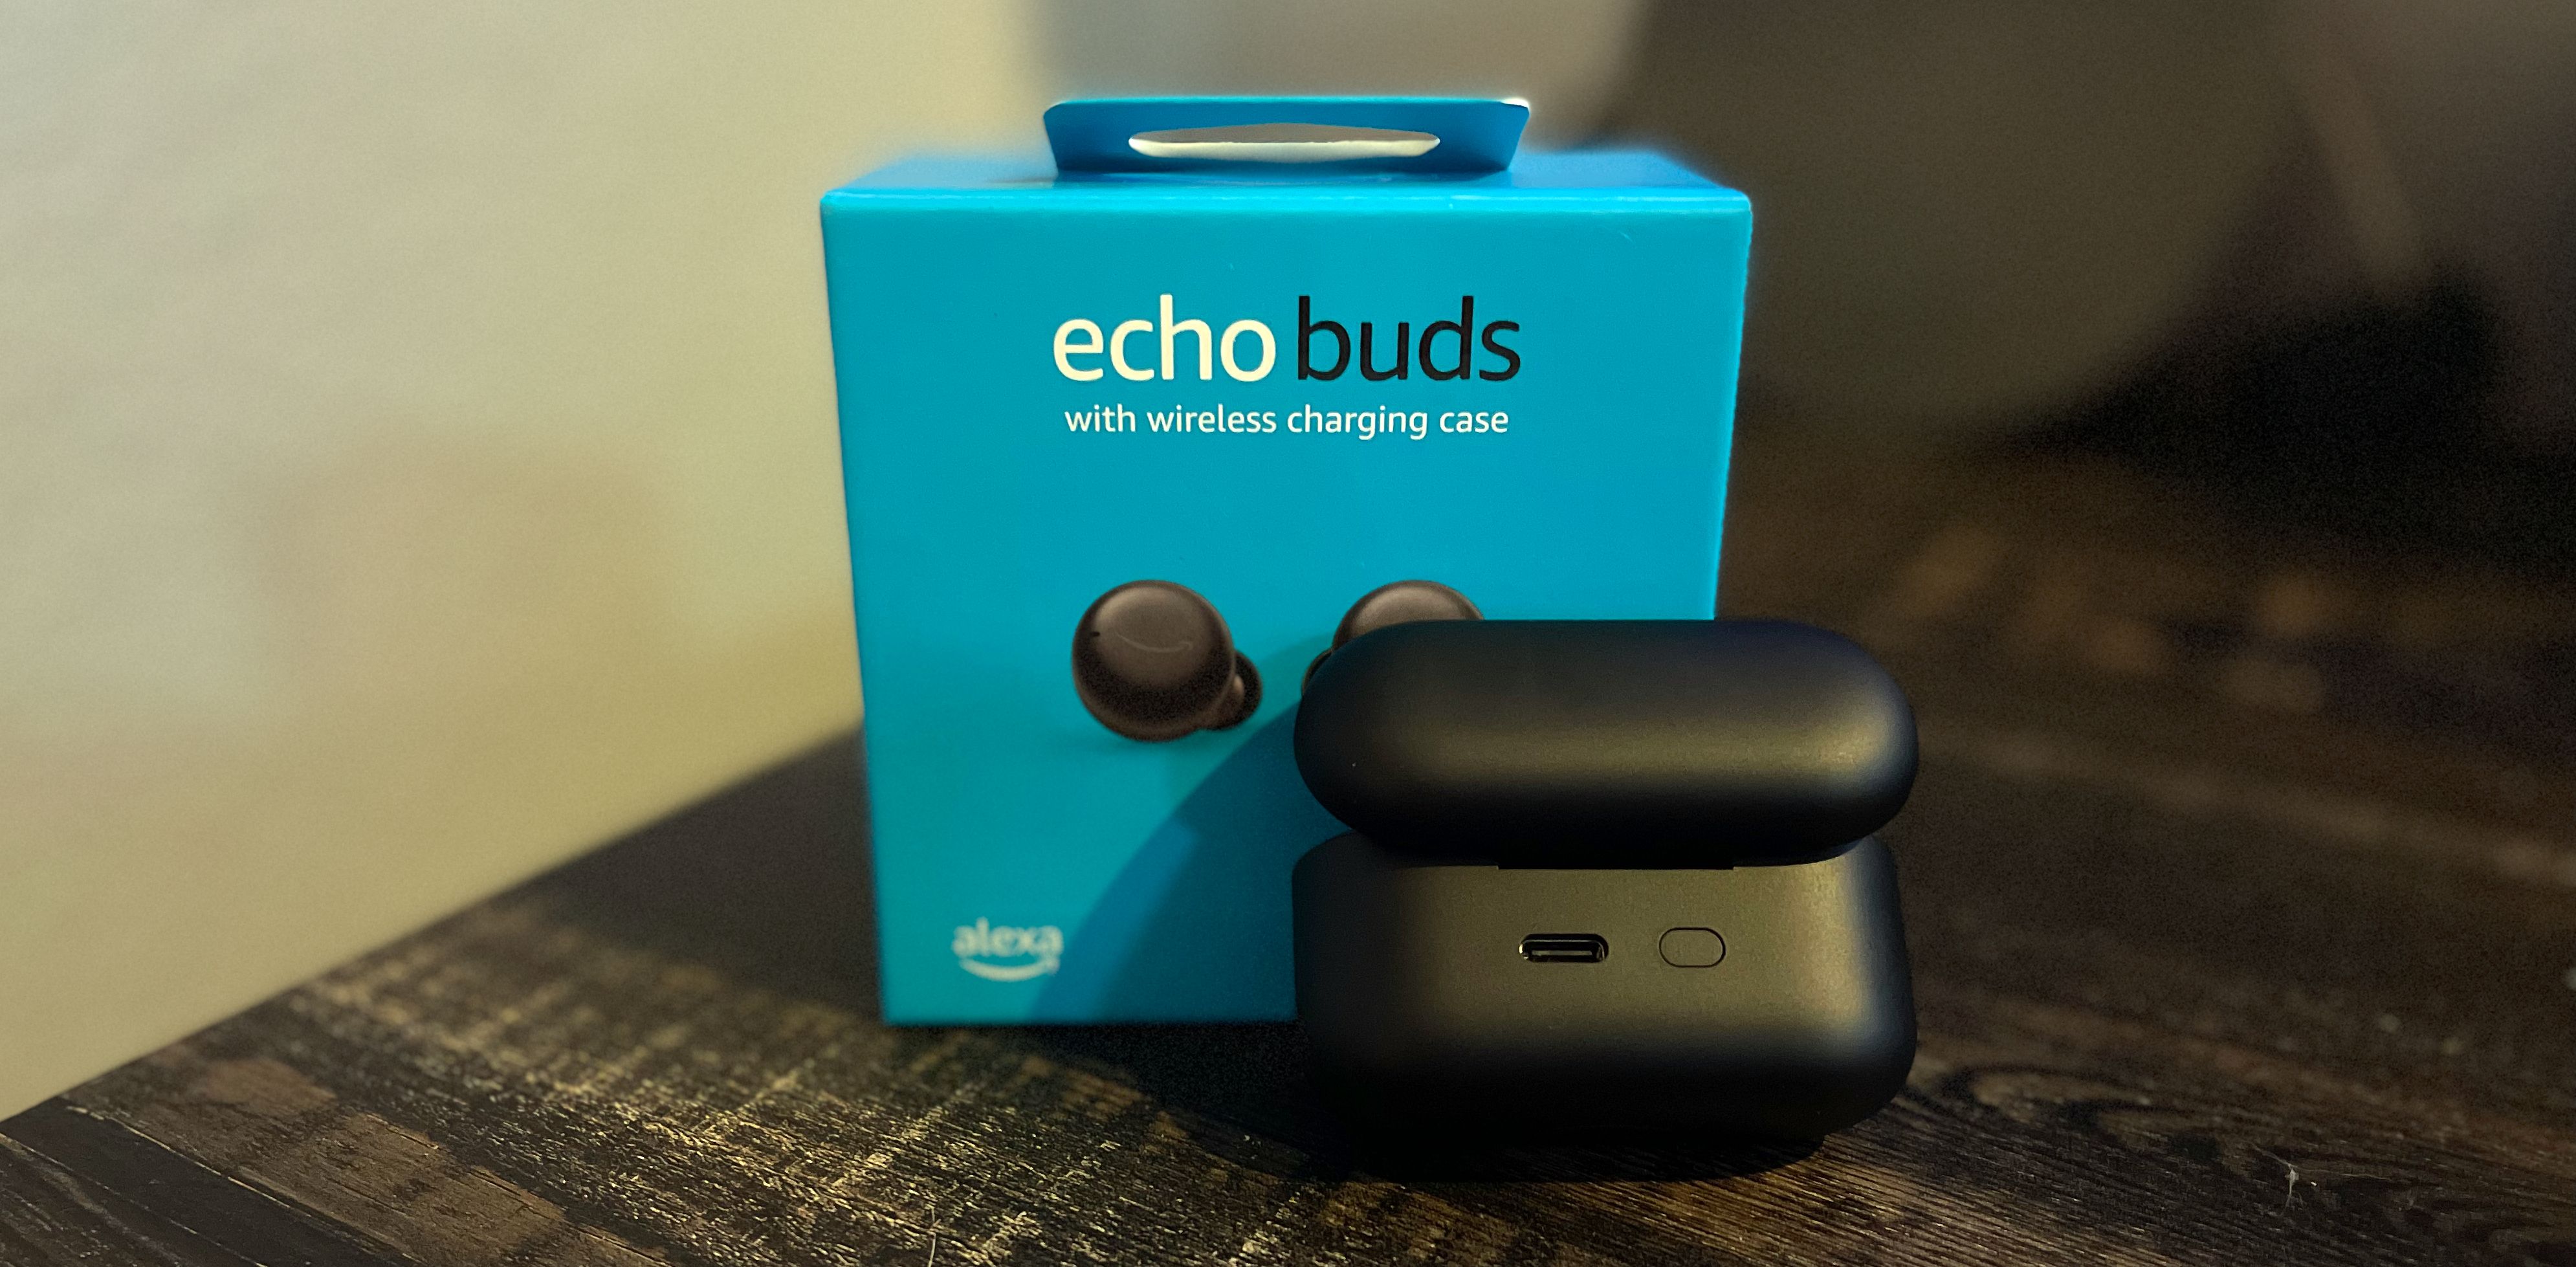 Echo Buds: Explore the power of Alexa on the go - About